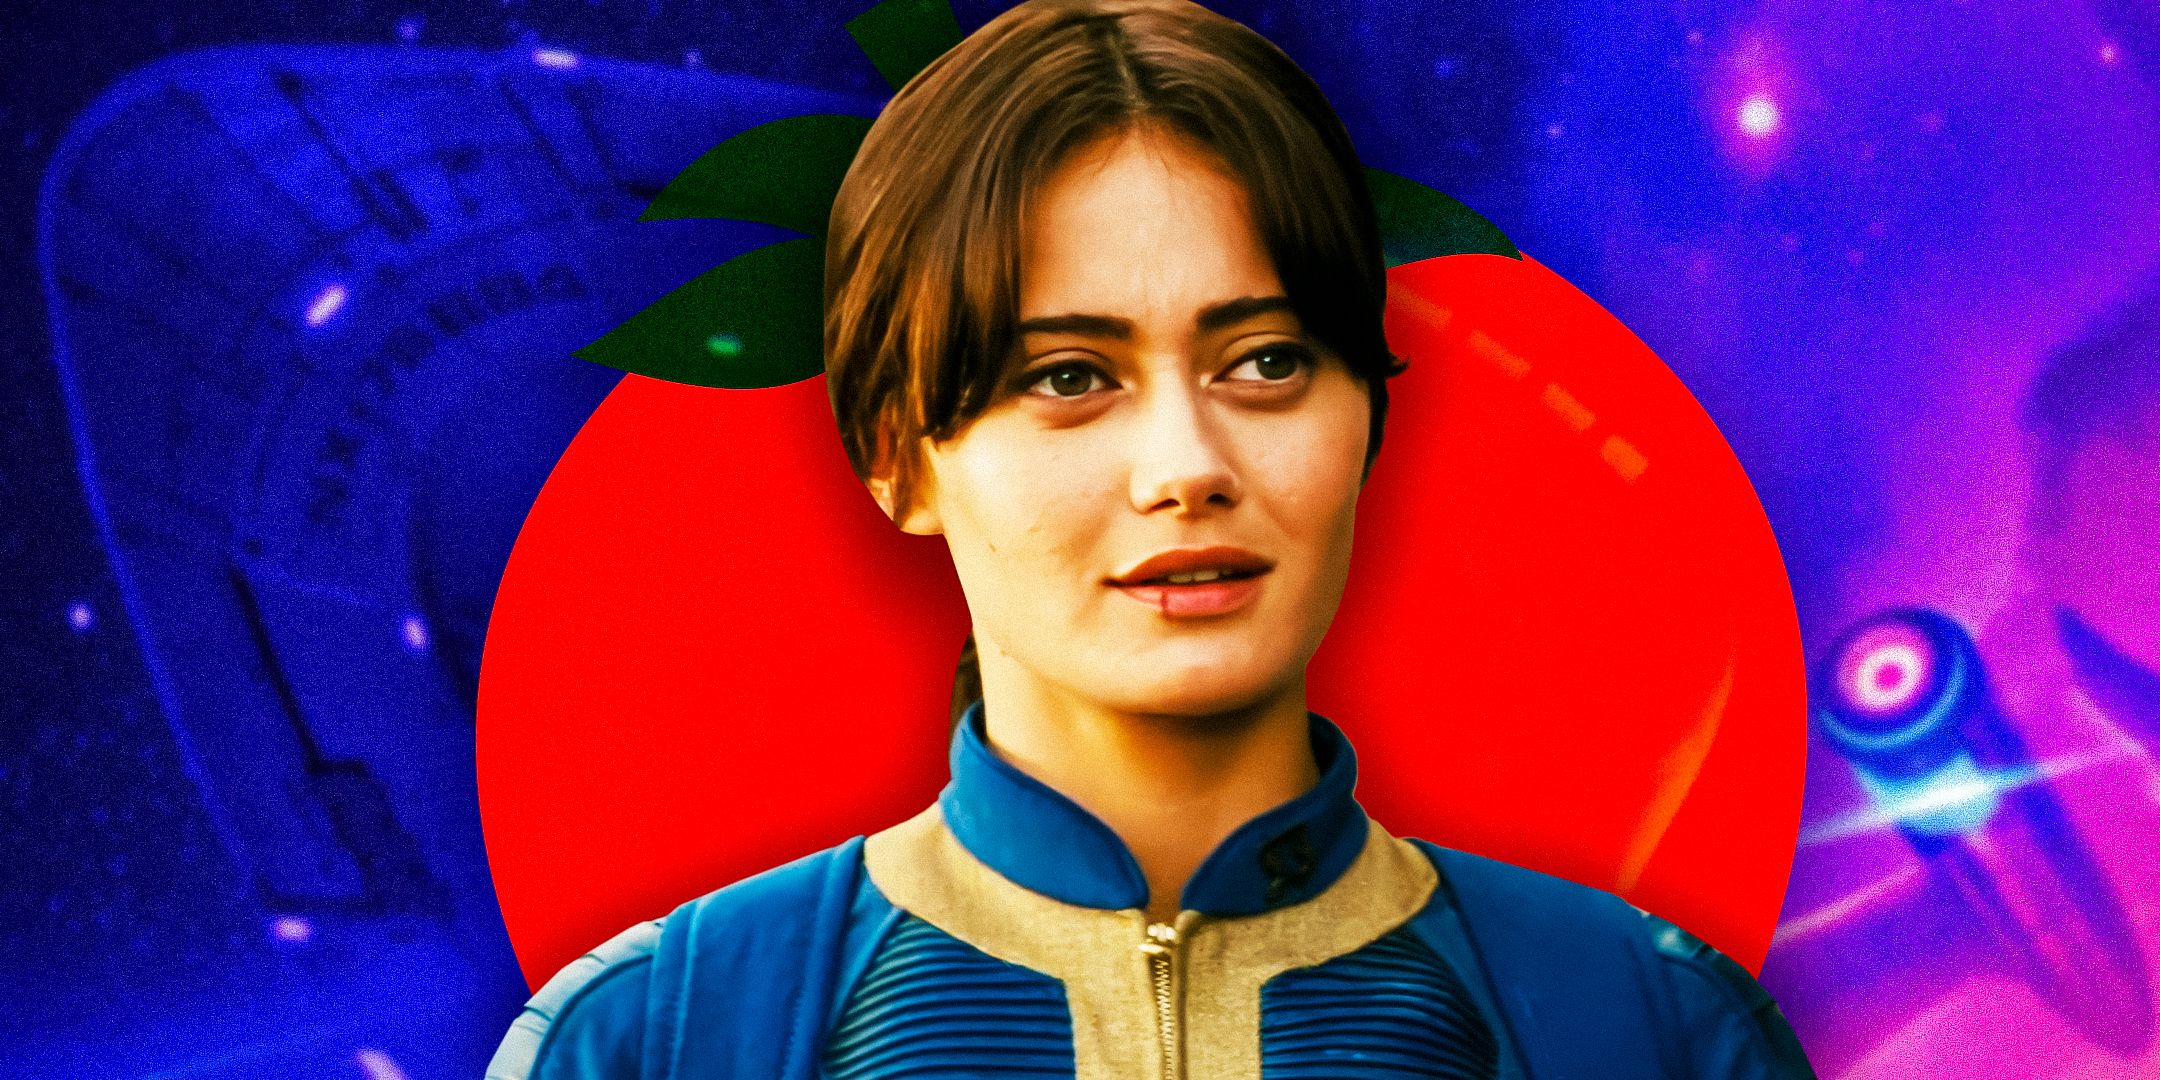 Ella Purnell as Lucy MacLean from Fallout 